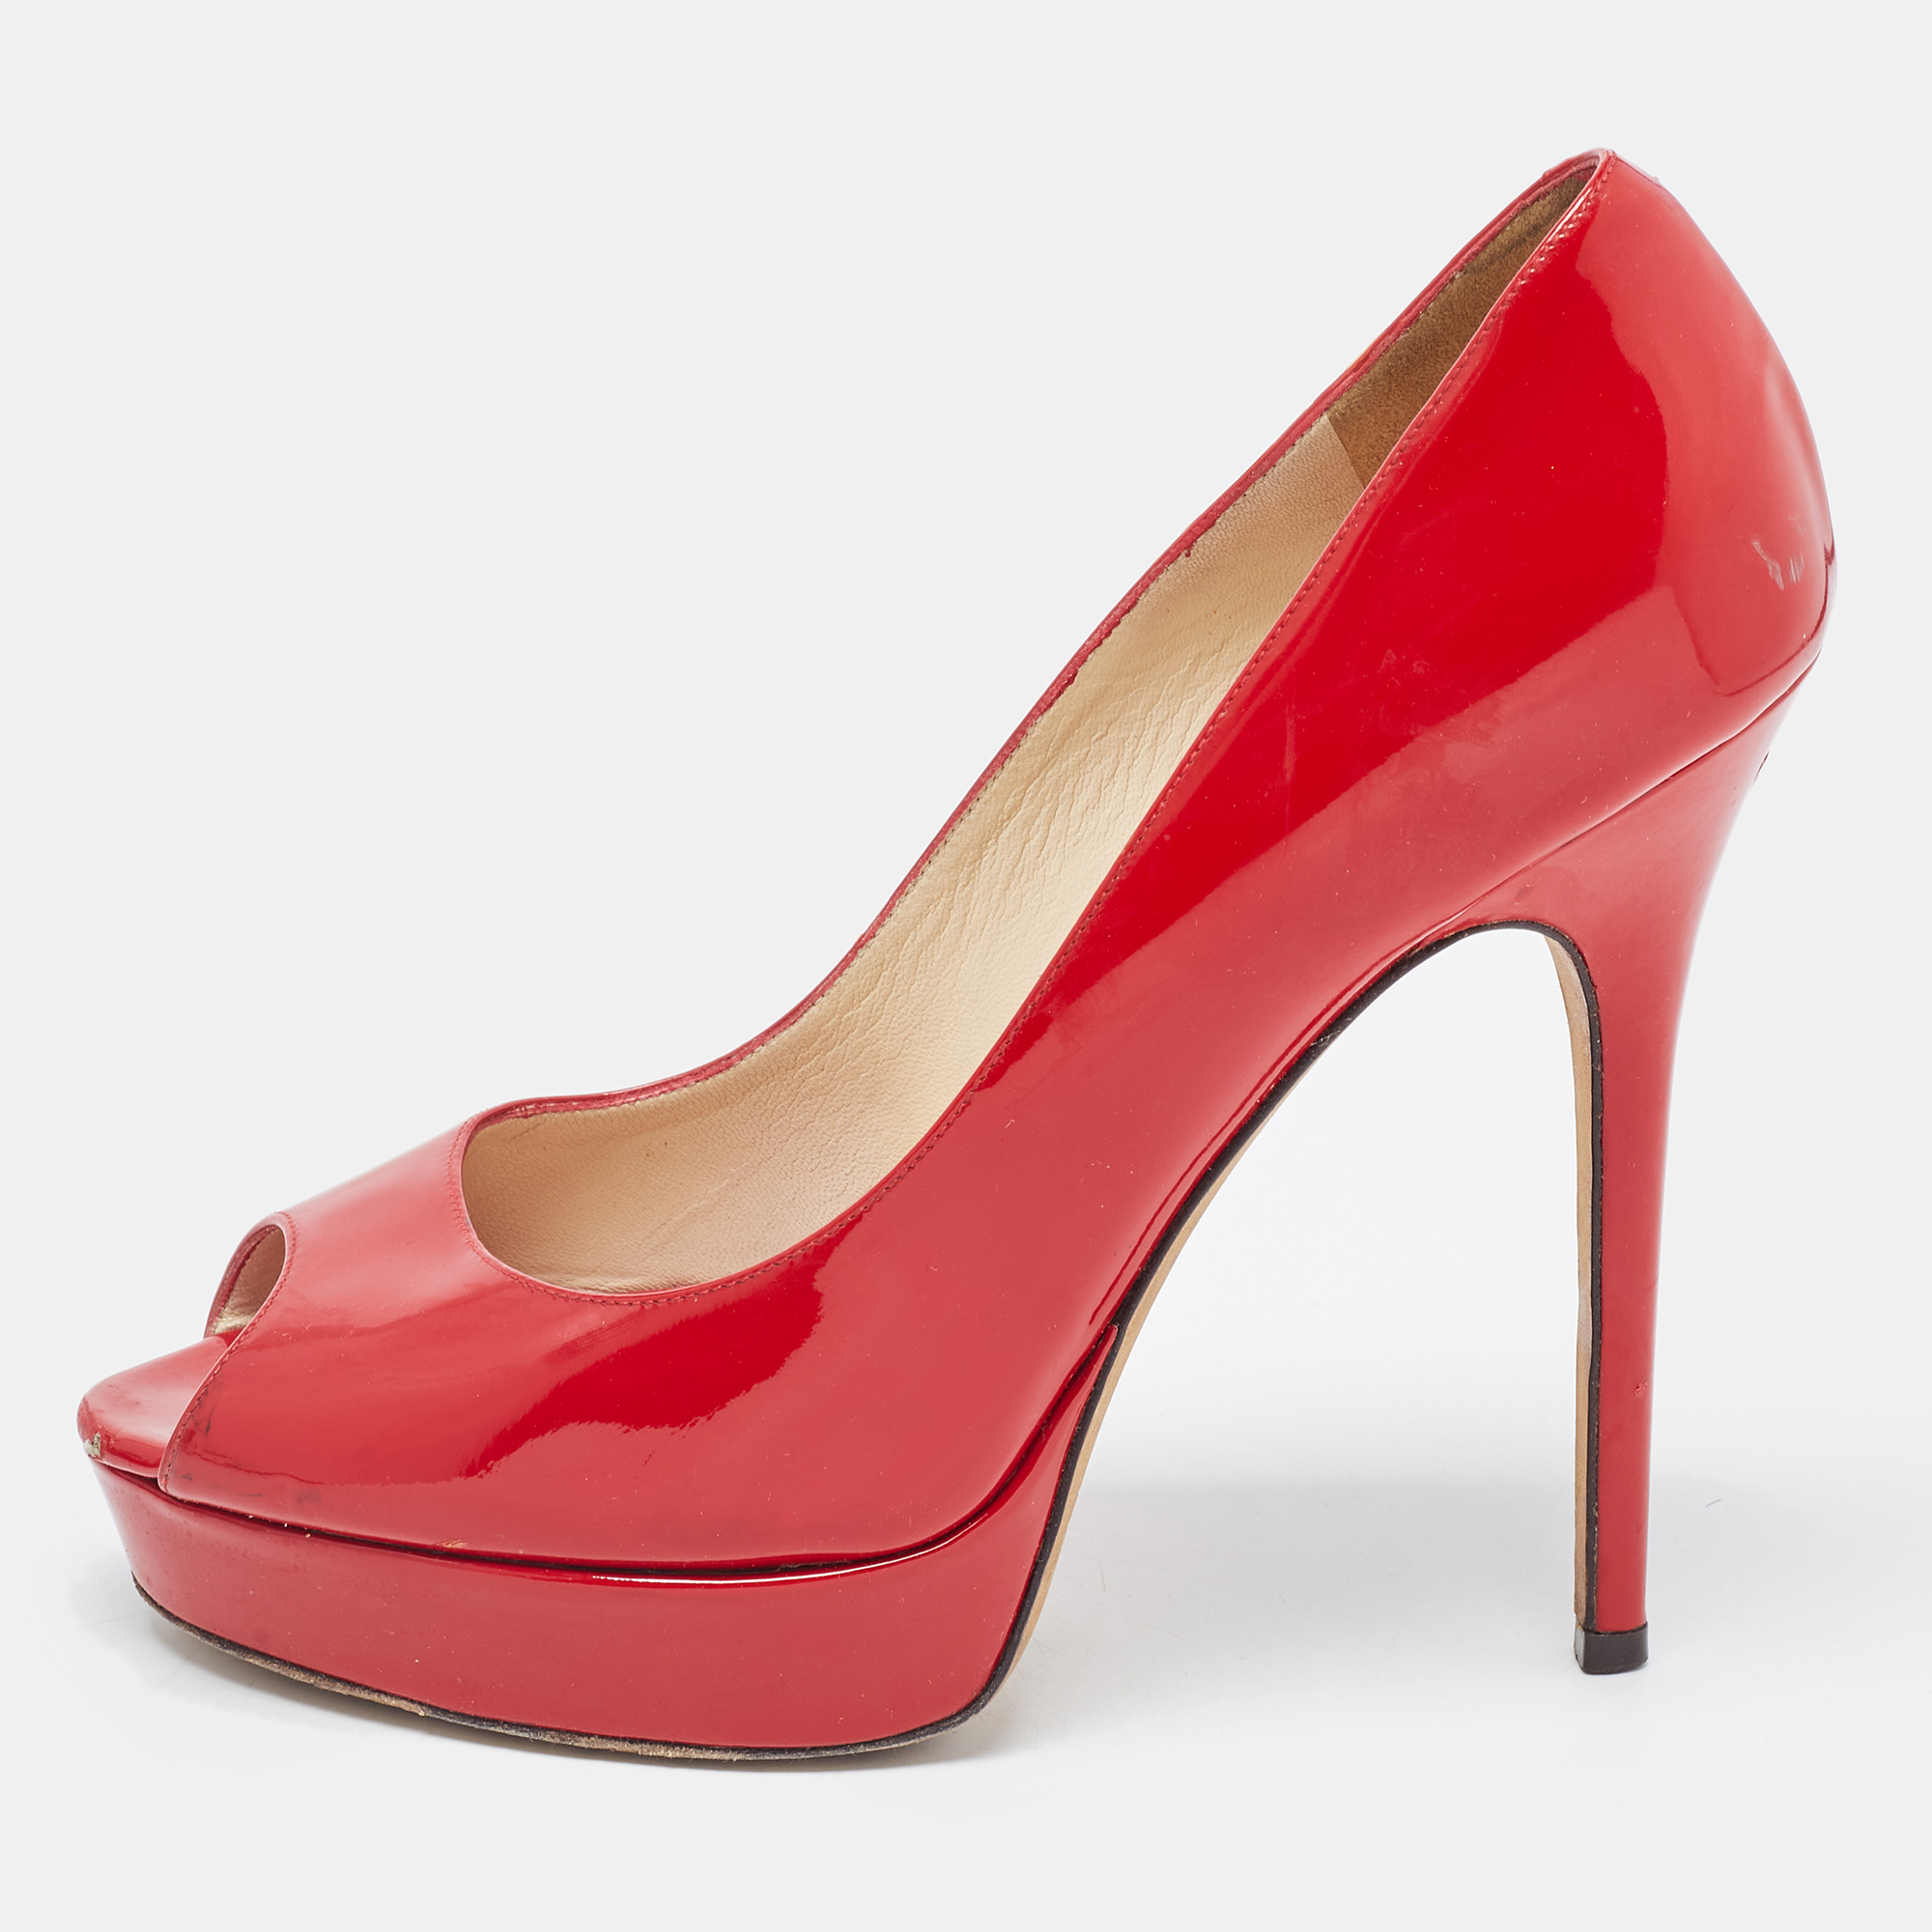 

Jimmy Choo Red Patent Leather Peep Toe Crown Pumps Size